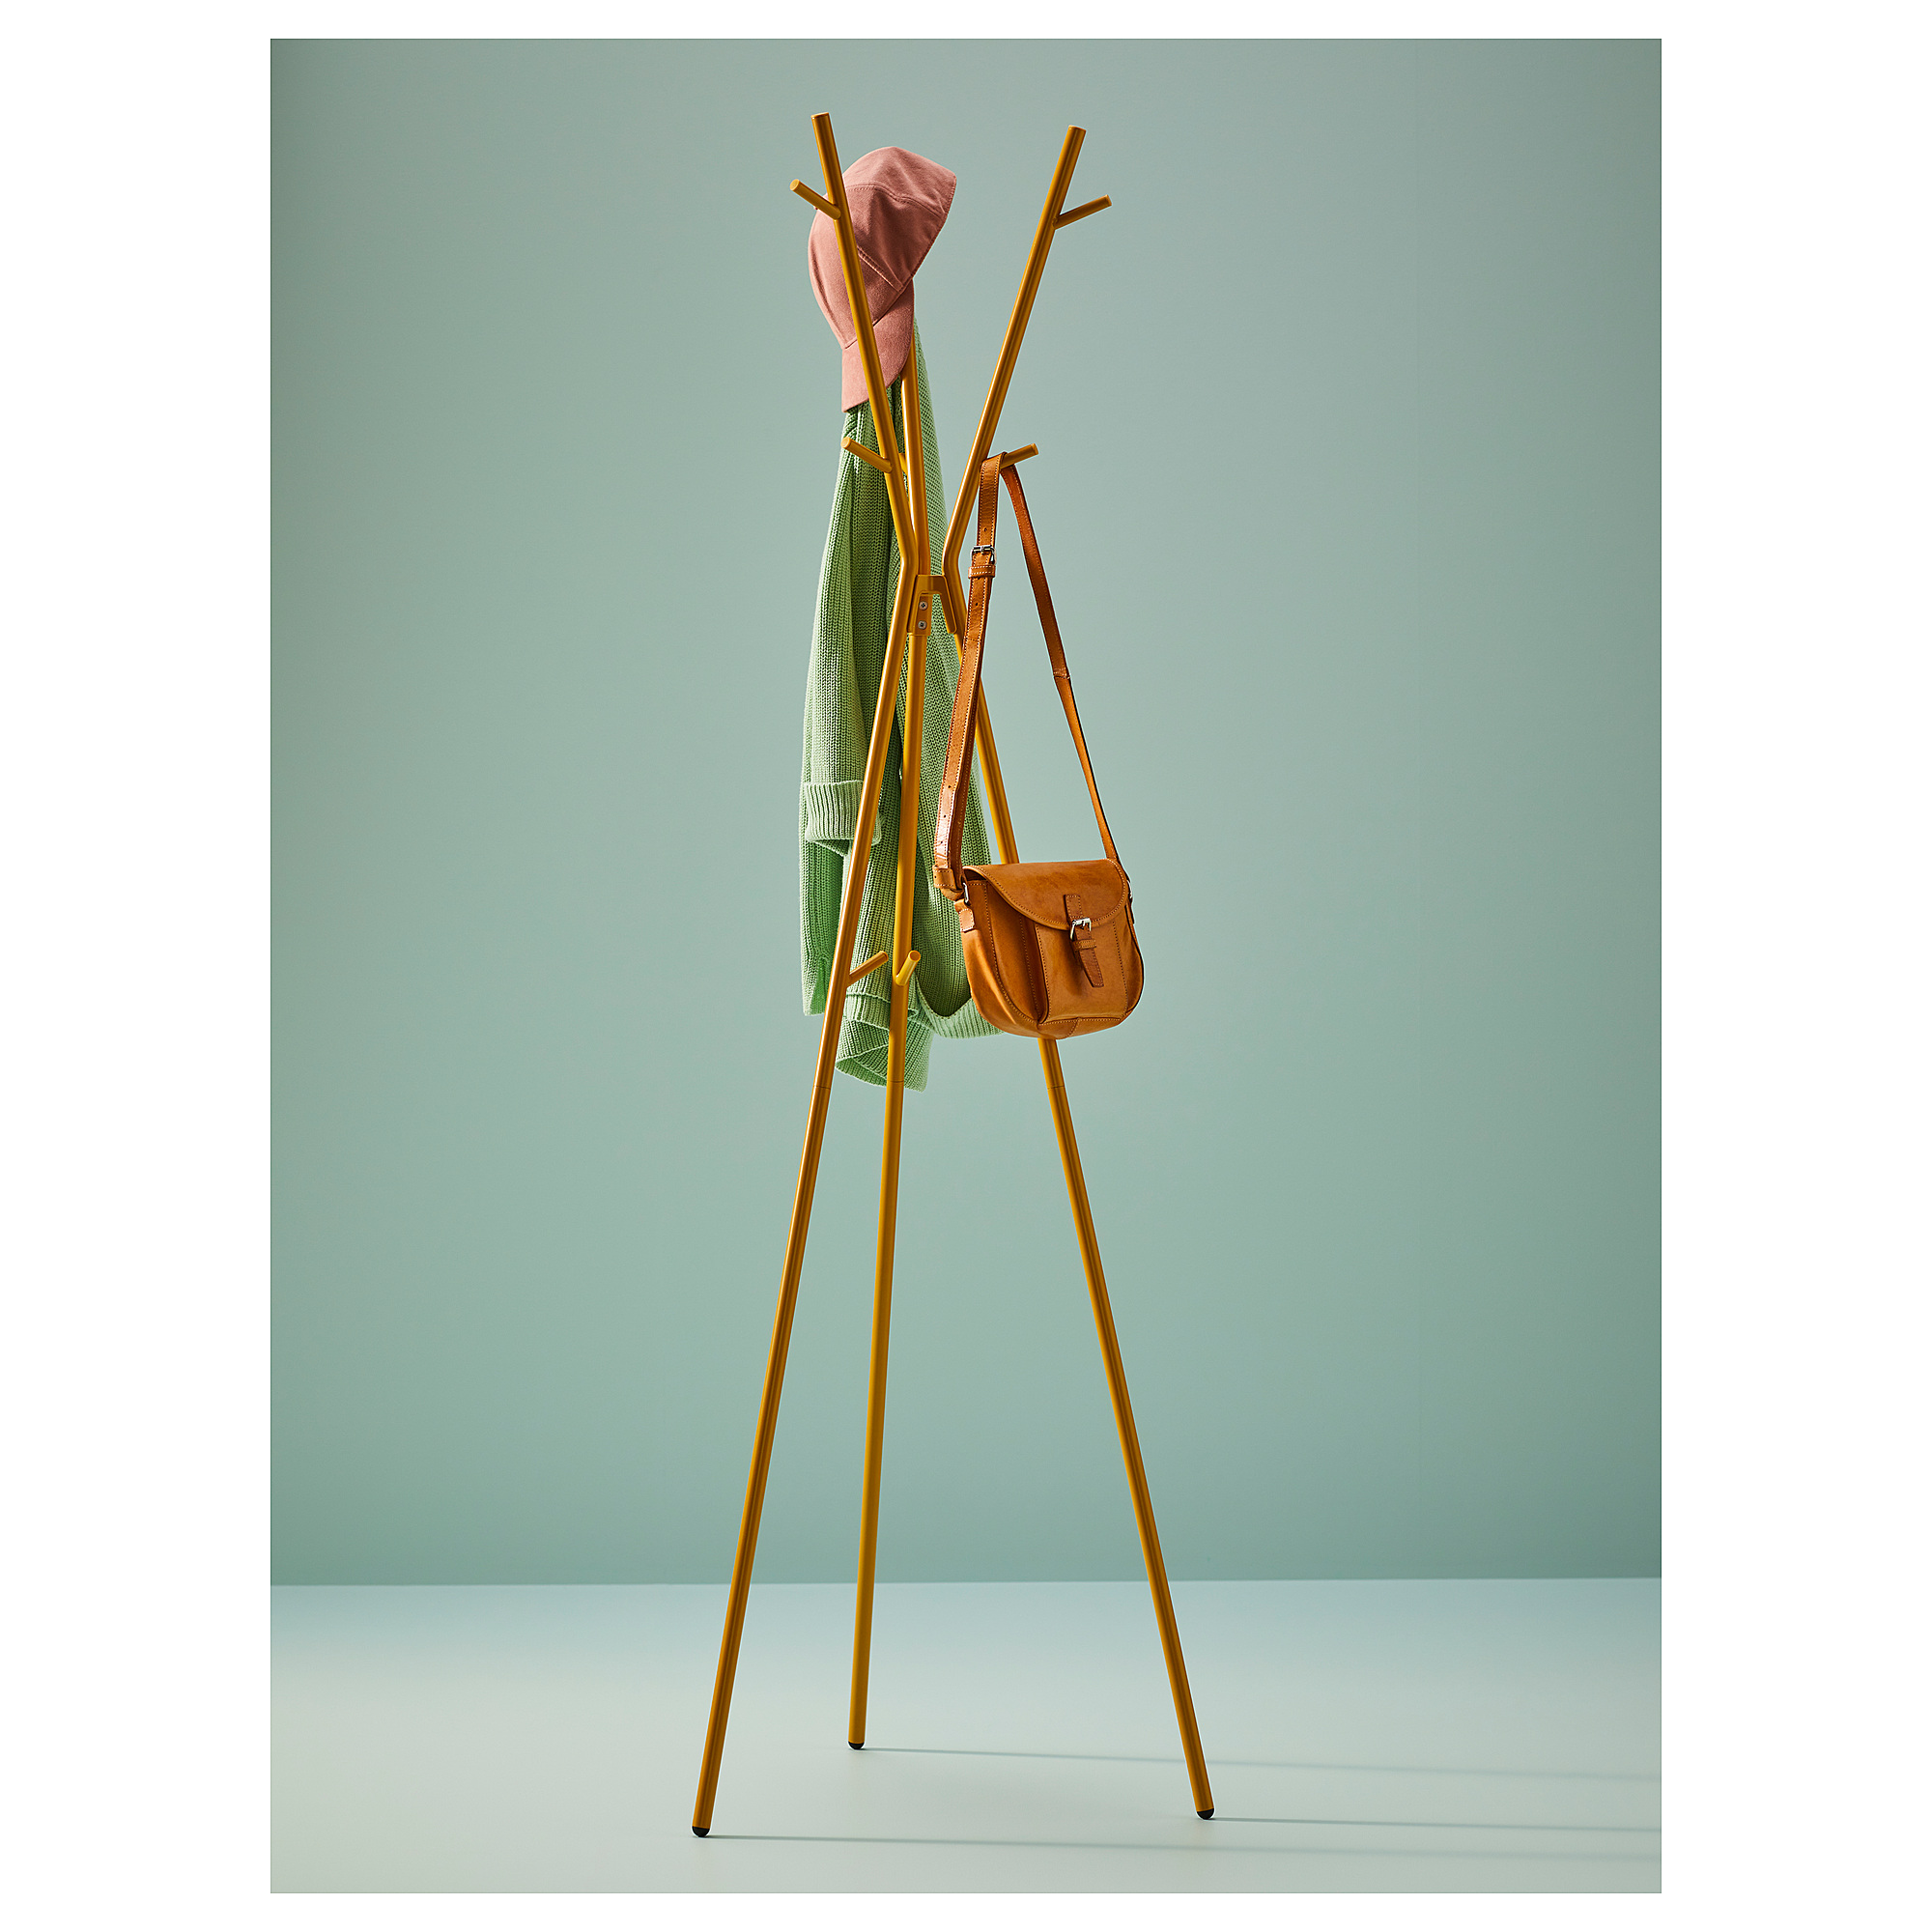 EKRAR hat and coat stand